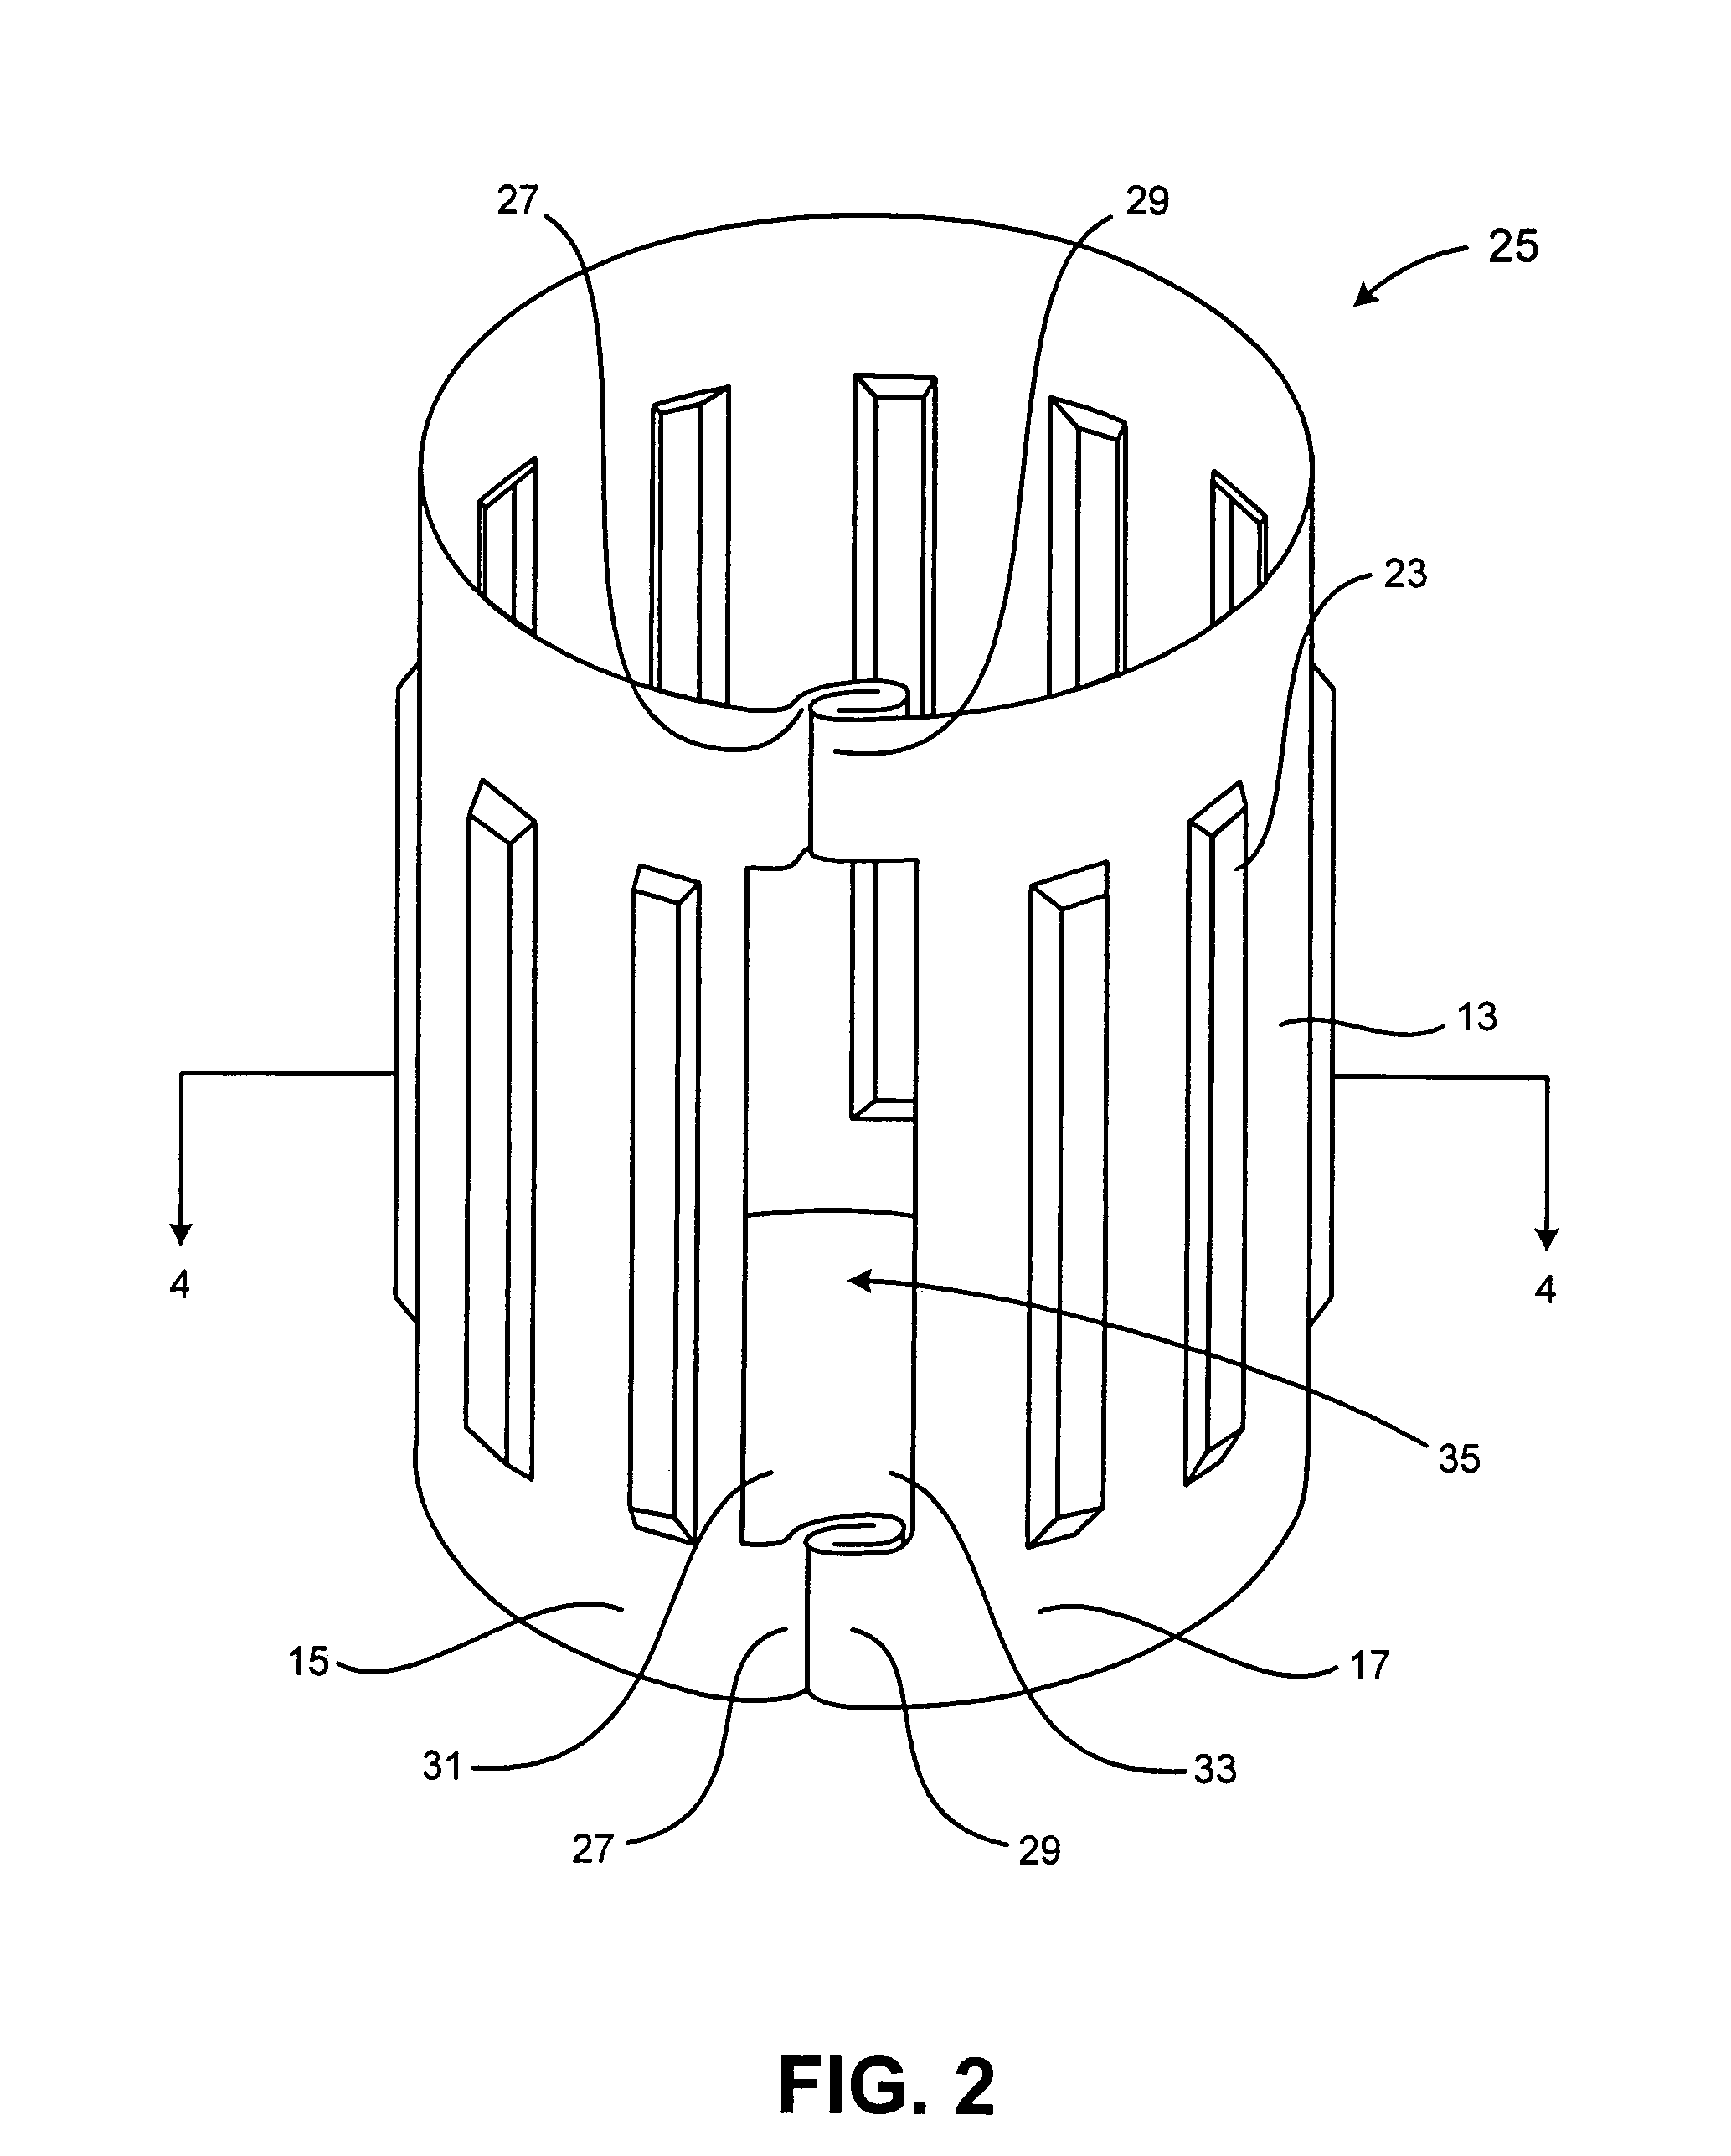 Tolerance ring for data storage with cut-out feature for mass control